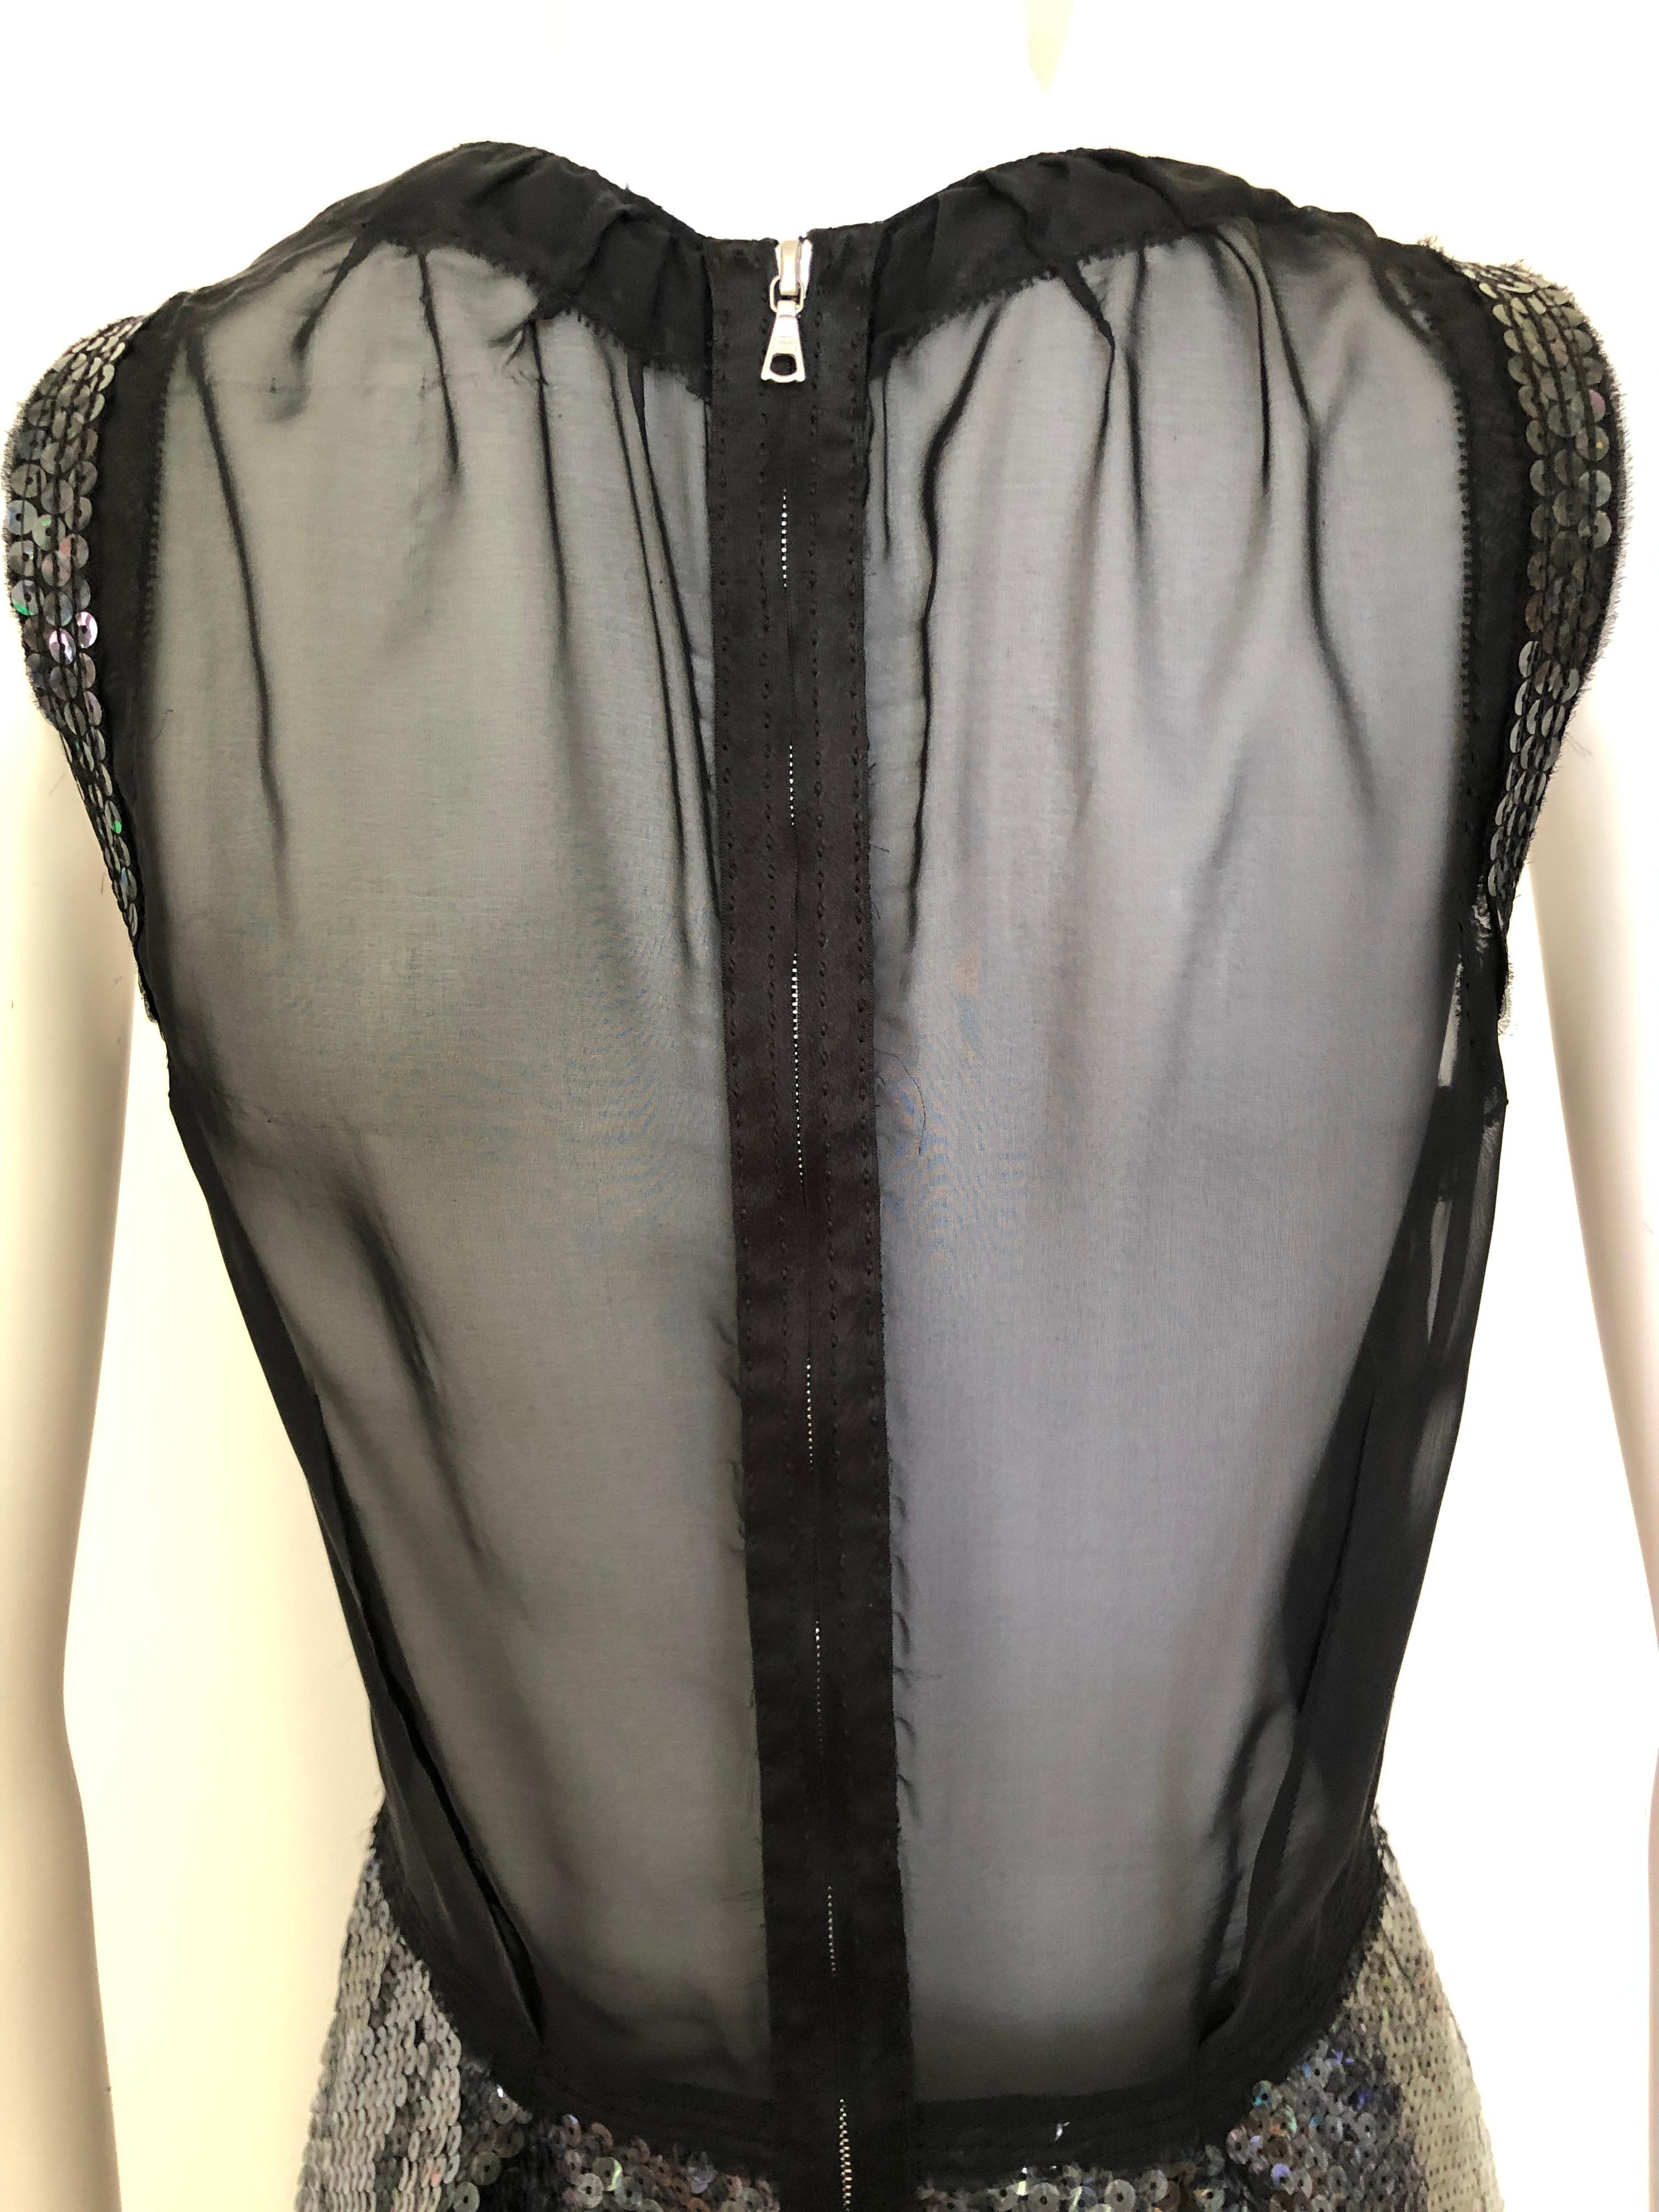 Marc Jacobs Black Sequin and Sheer Lingerie Bodice Sleeveless Cocktail Dress For Sale 5